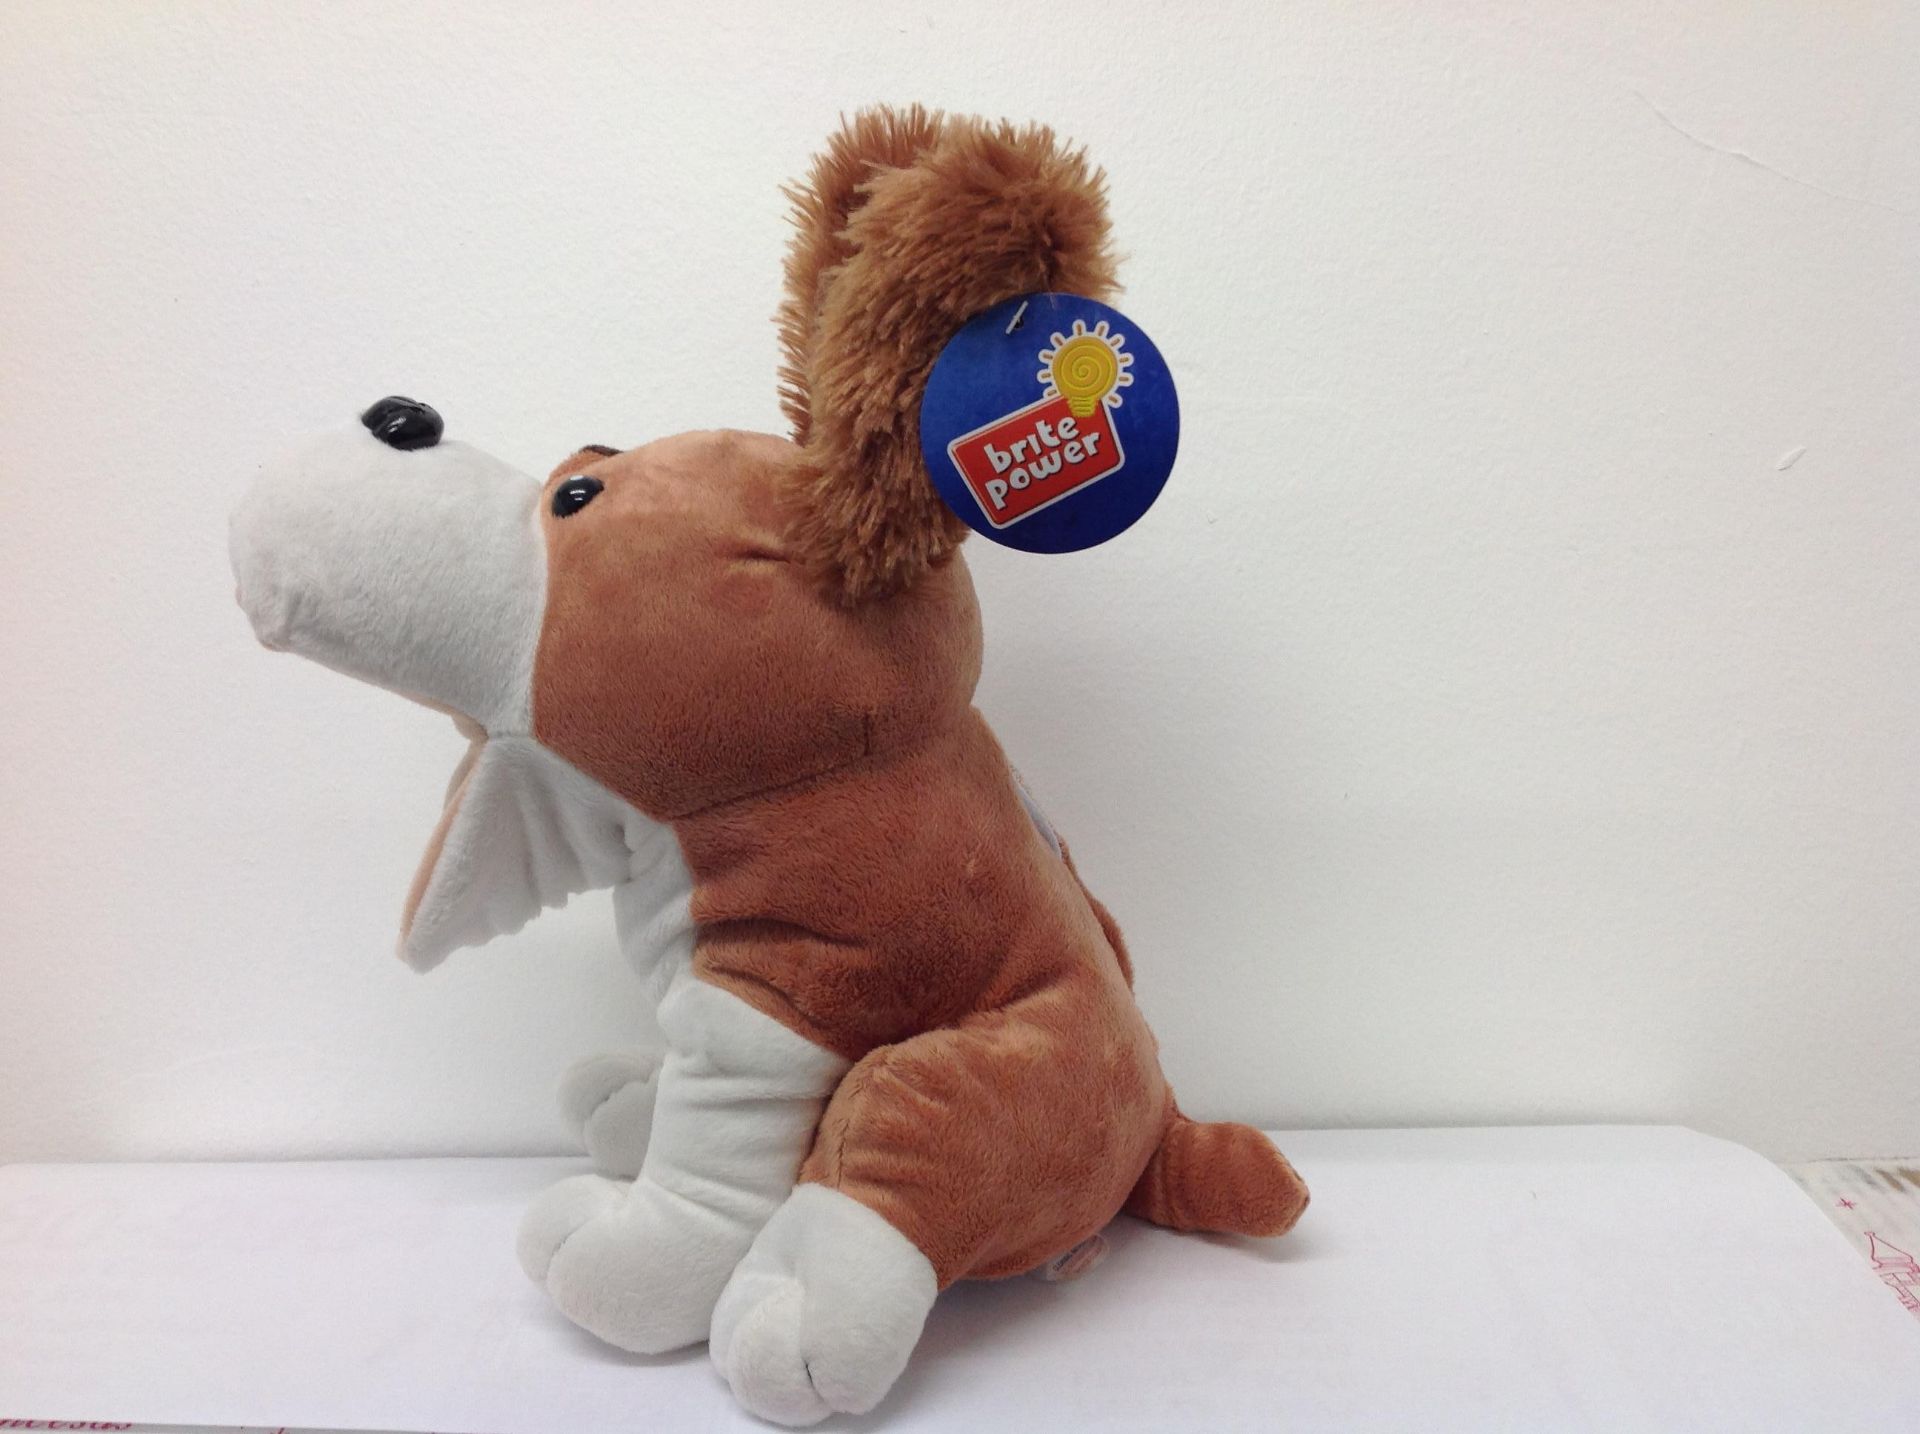 20 x Brite Power Talking Large Dog Hand Puppet. Brand new stock. RRP £19.99 each, total original RRP - Image 2 of 4